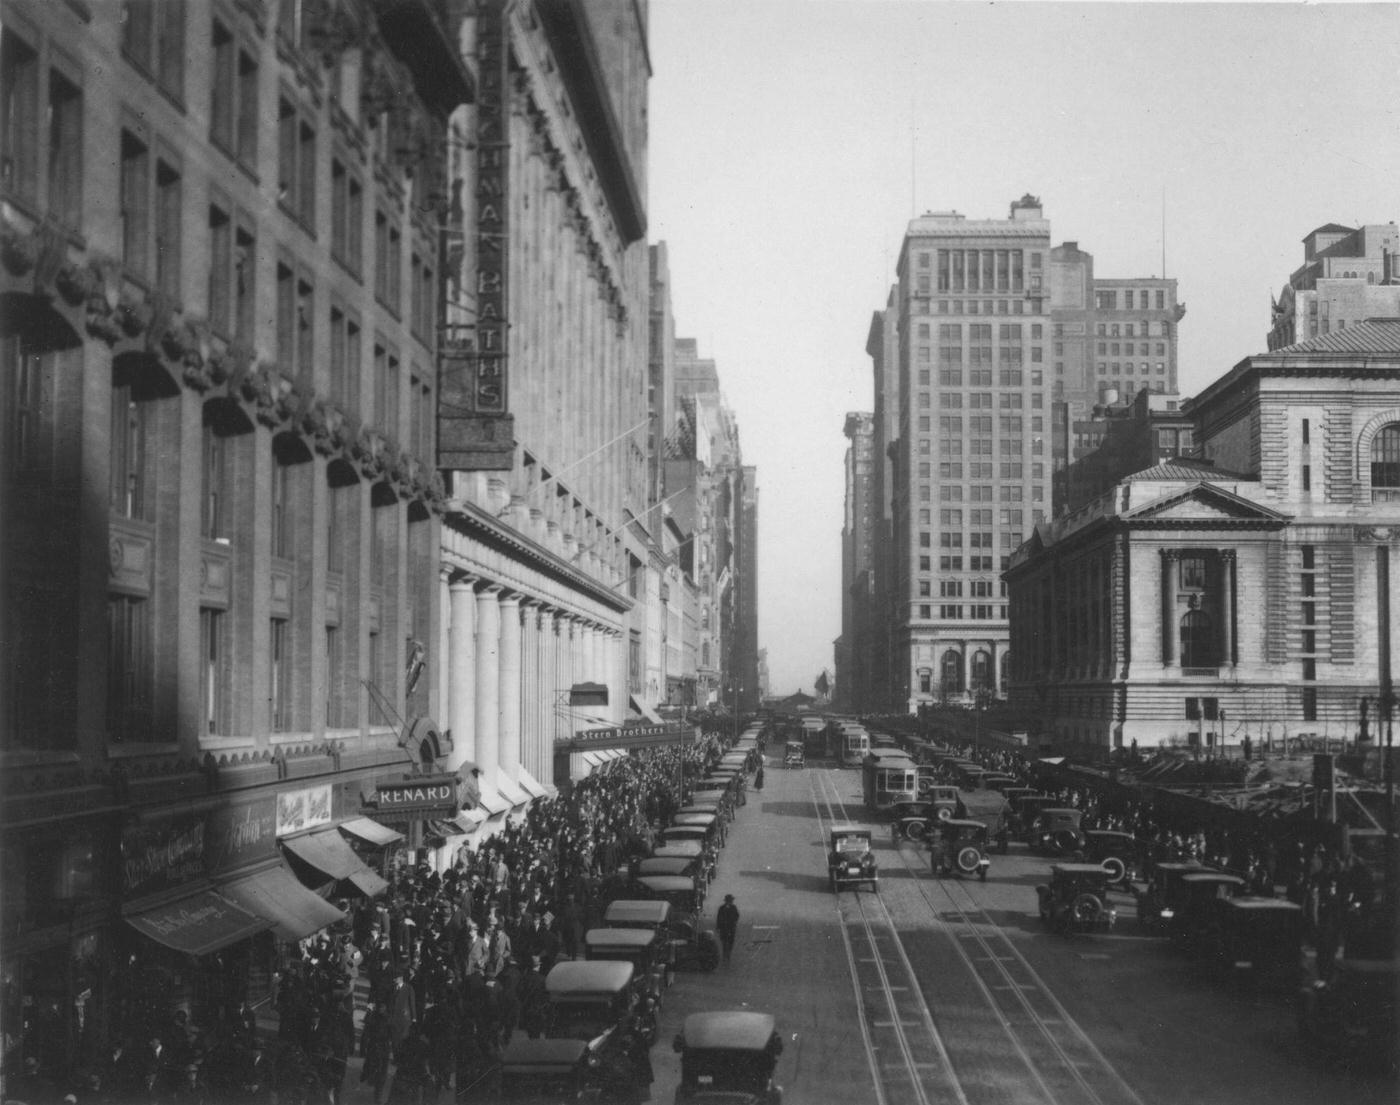 West 42Nd Street Between Fifth And Sixth Avenues, Looking East, New York Public Library On Right, Manhattan, 1929.